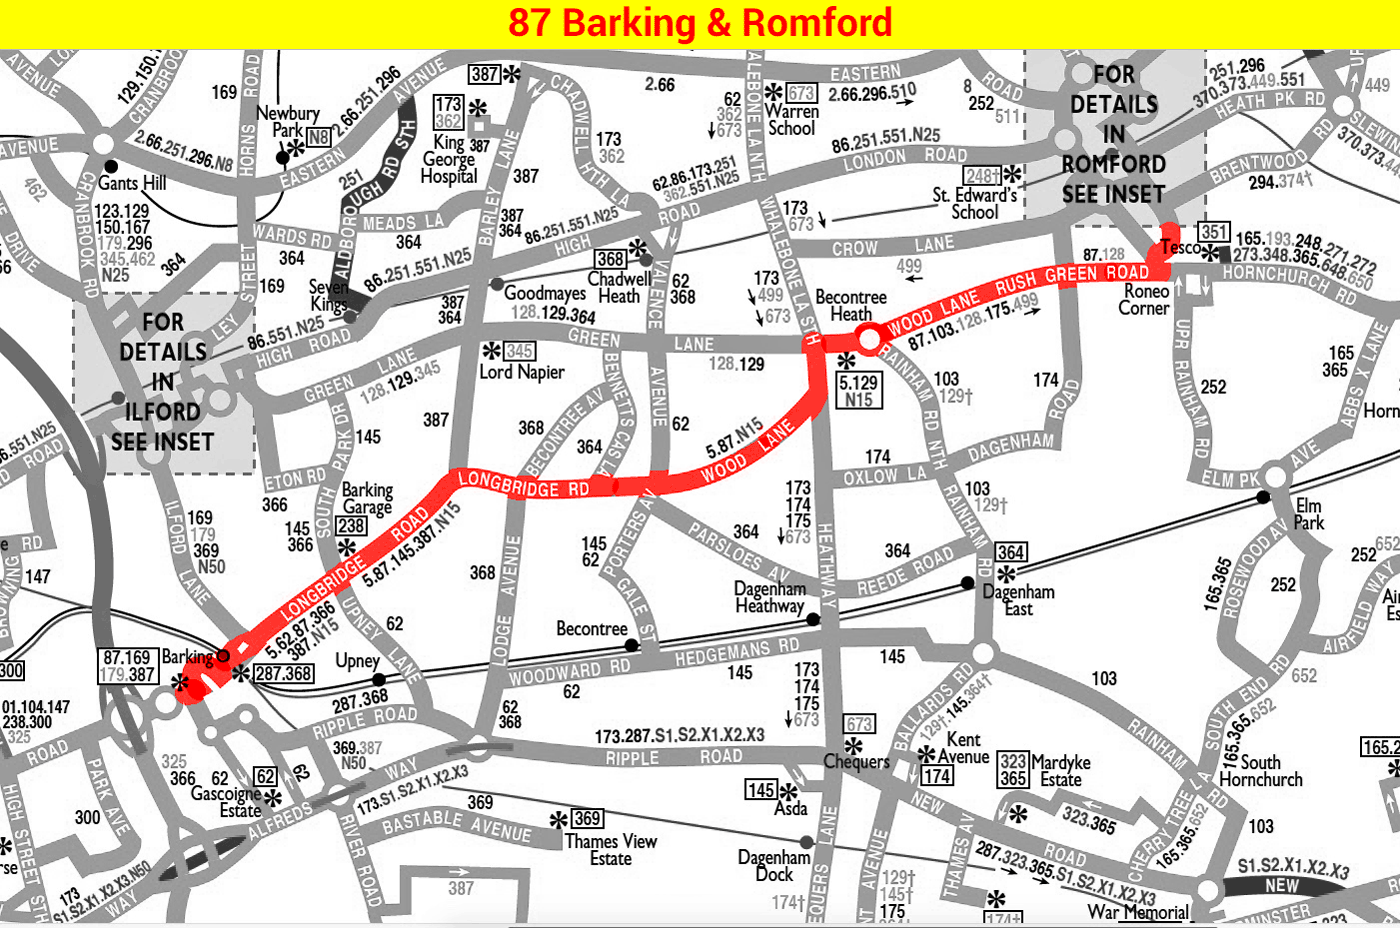 Route 87 as shown on 1995 map